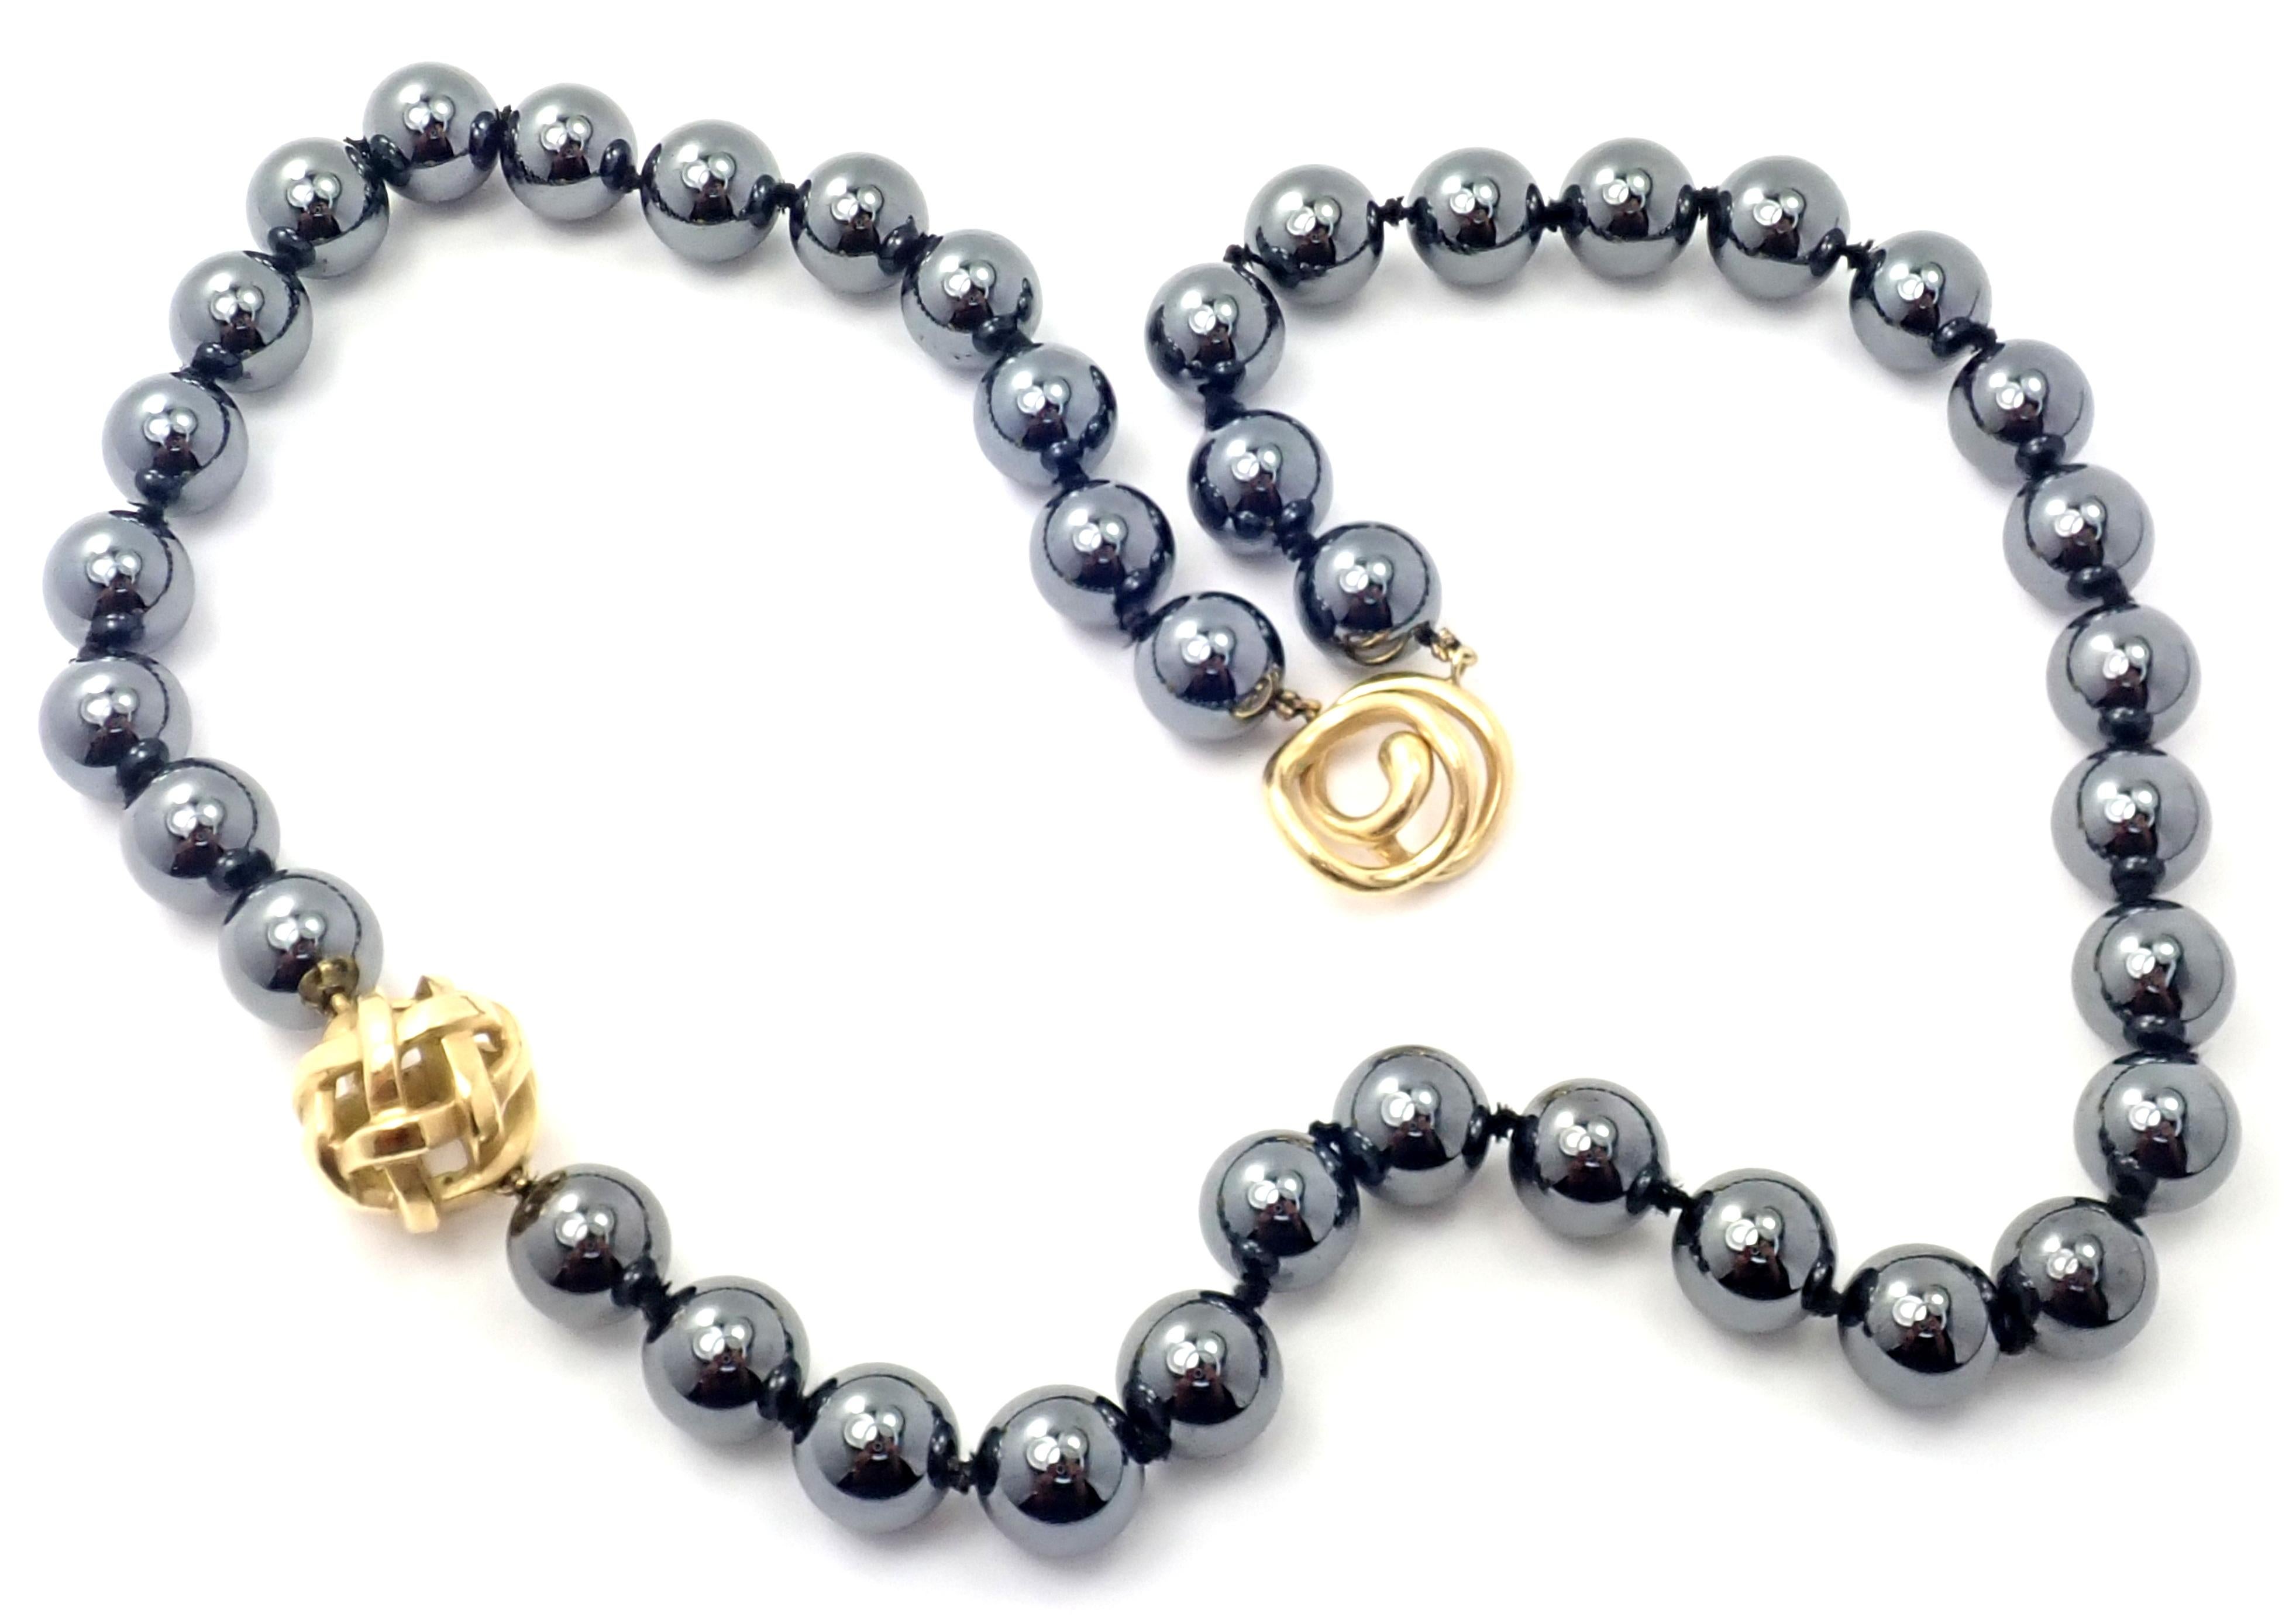 Angela Cummings 18k yellow gold hematite bead necklace.
Metal: 18k yellow gold
Length: 20 inches
Weight: 122.8 grams
Beads: 40 hematite beads 10.5mm each
Hallmarks: 1986 Cummings 18k
YOUR PRICE: $2,200
T2798mdhd